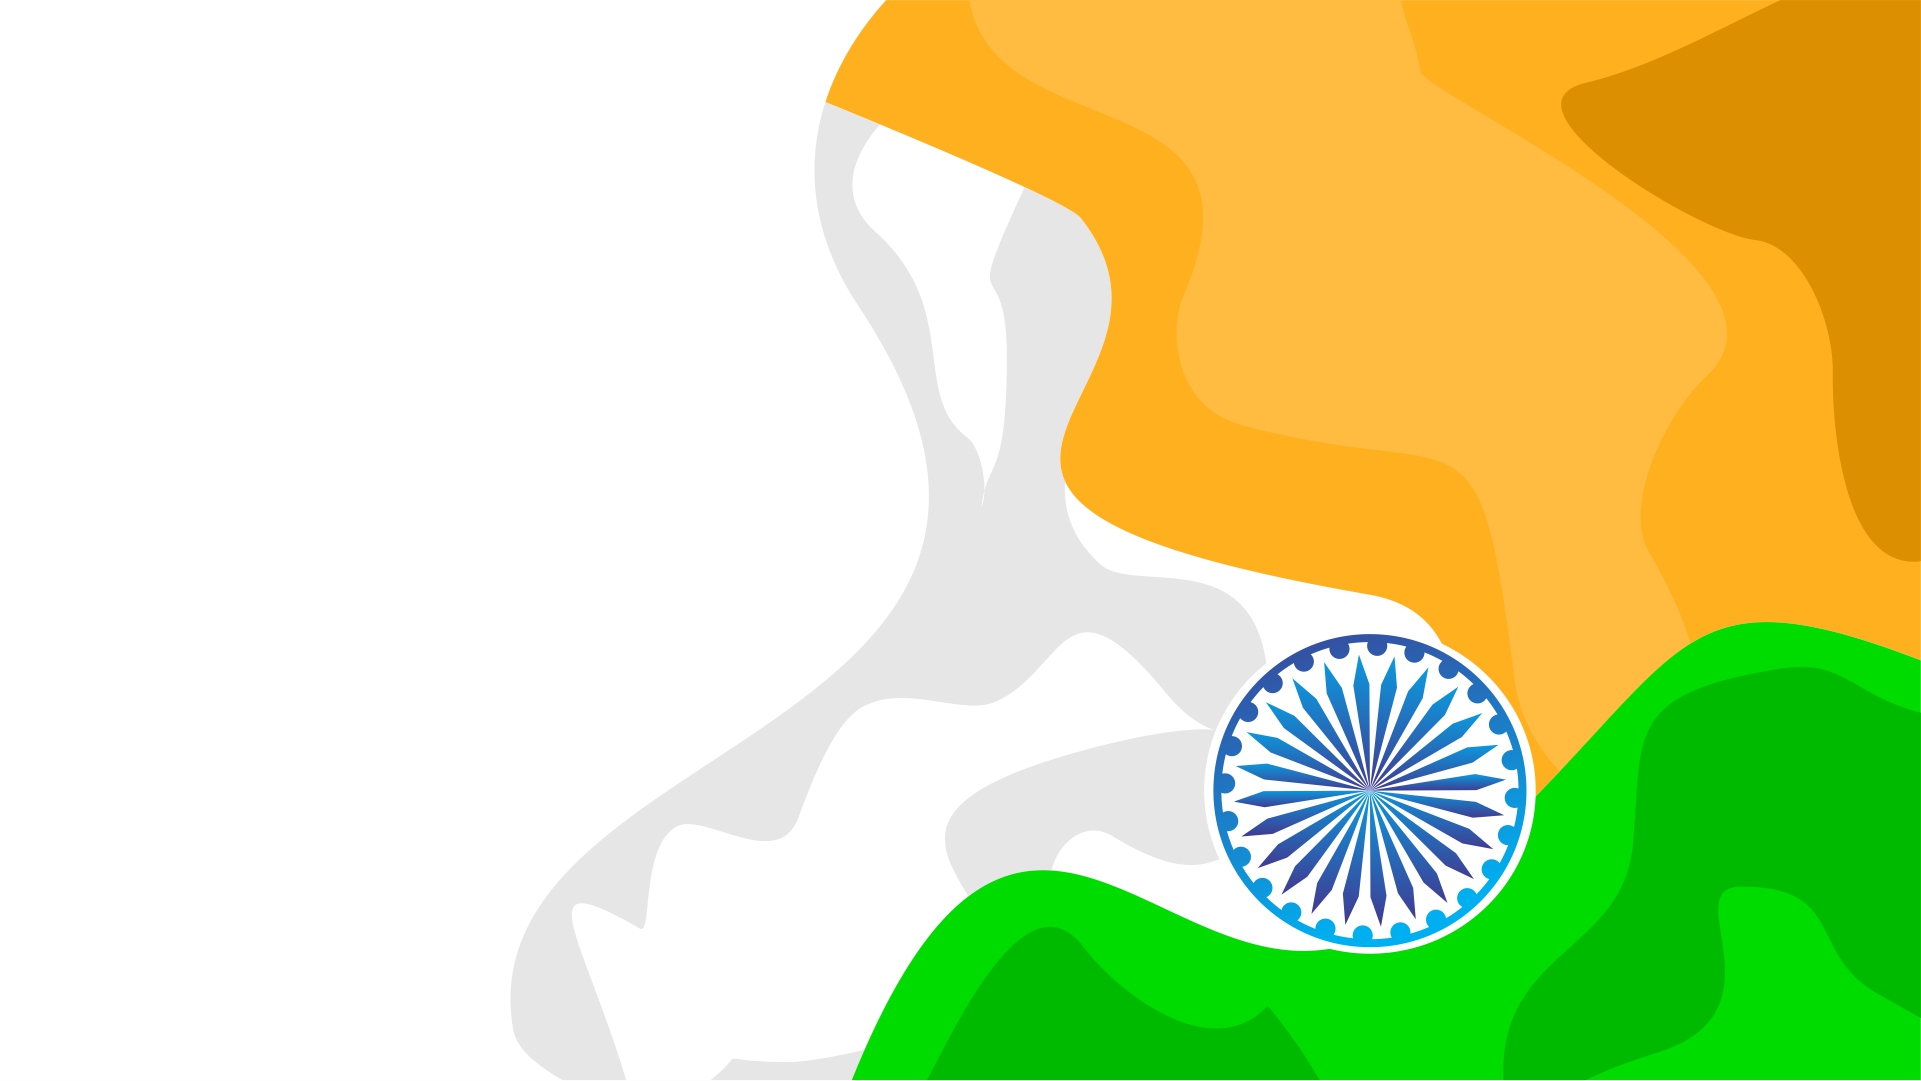 Download 26 Wish India Republic January Day HQ PNG Image in different  resolution | FreePNGImg